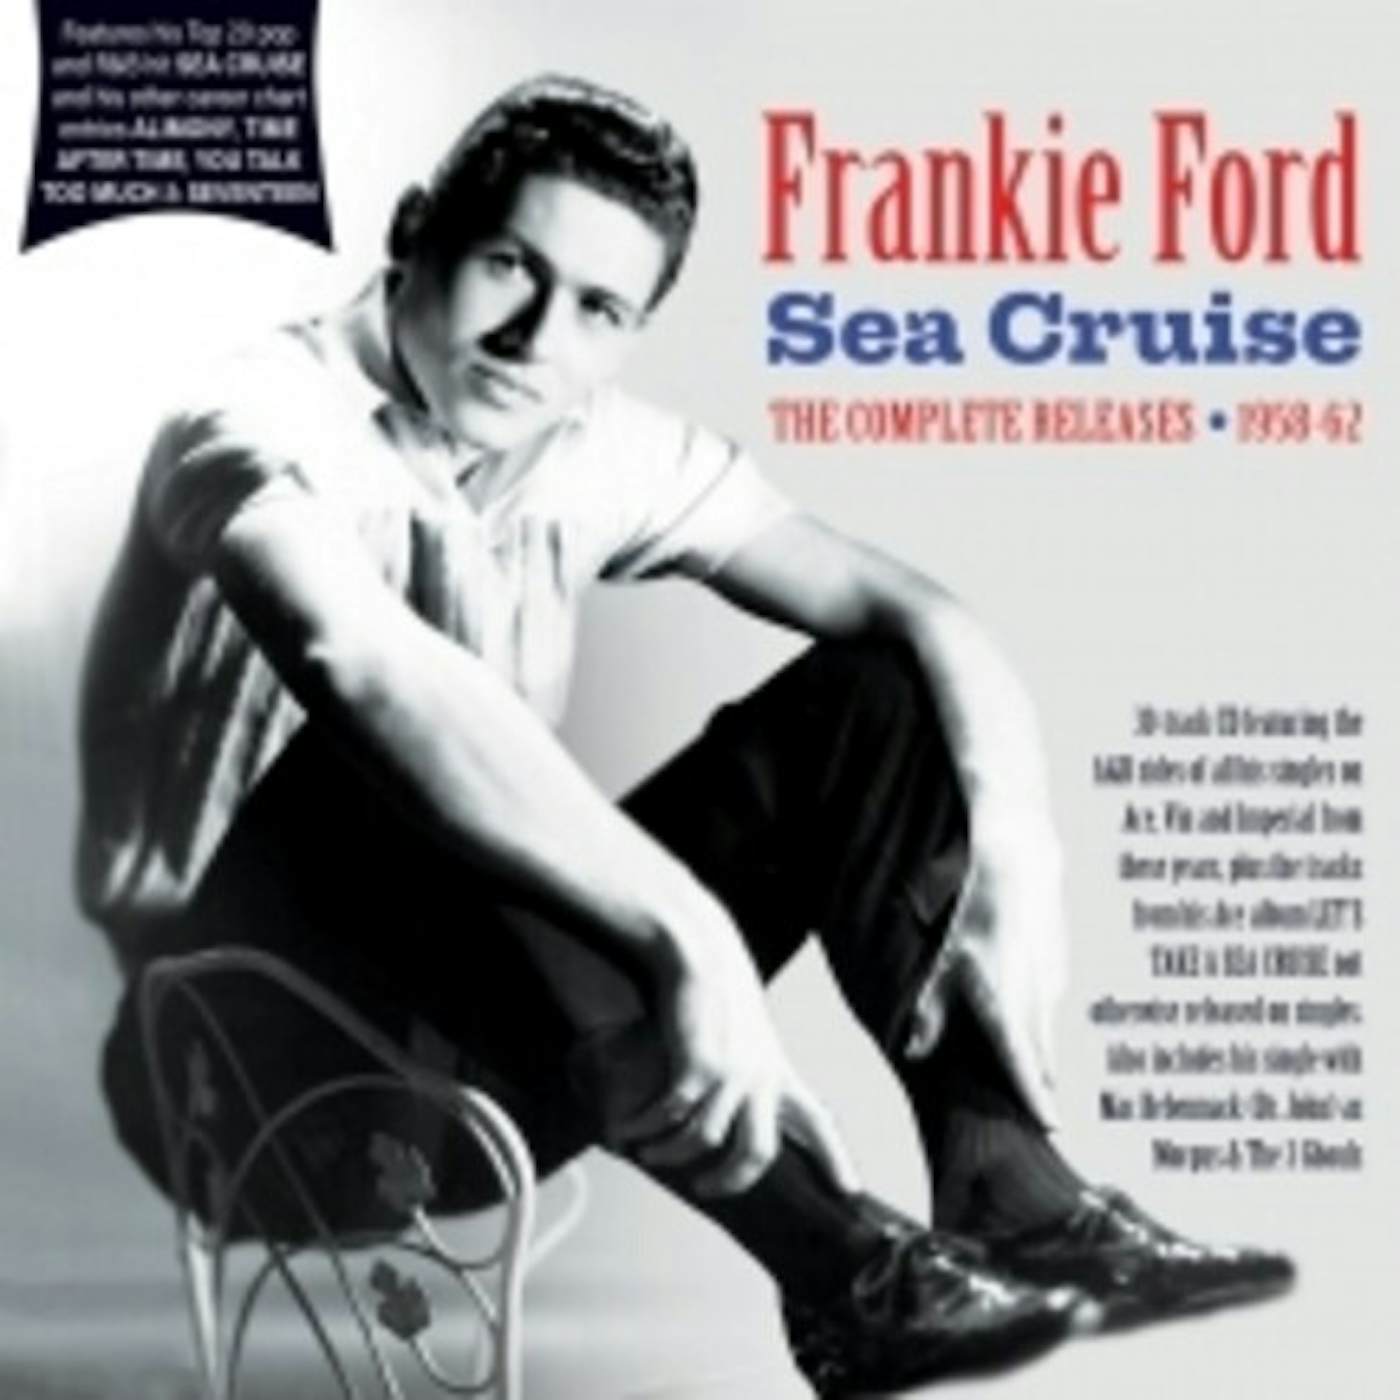 Frankie Ford COMPLETE RELEASES 1958-62 CD